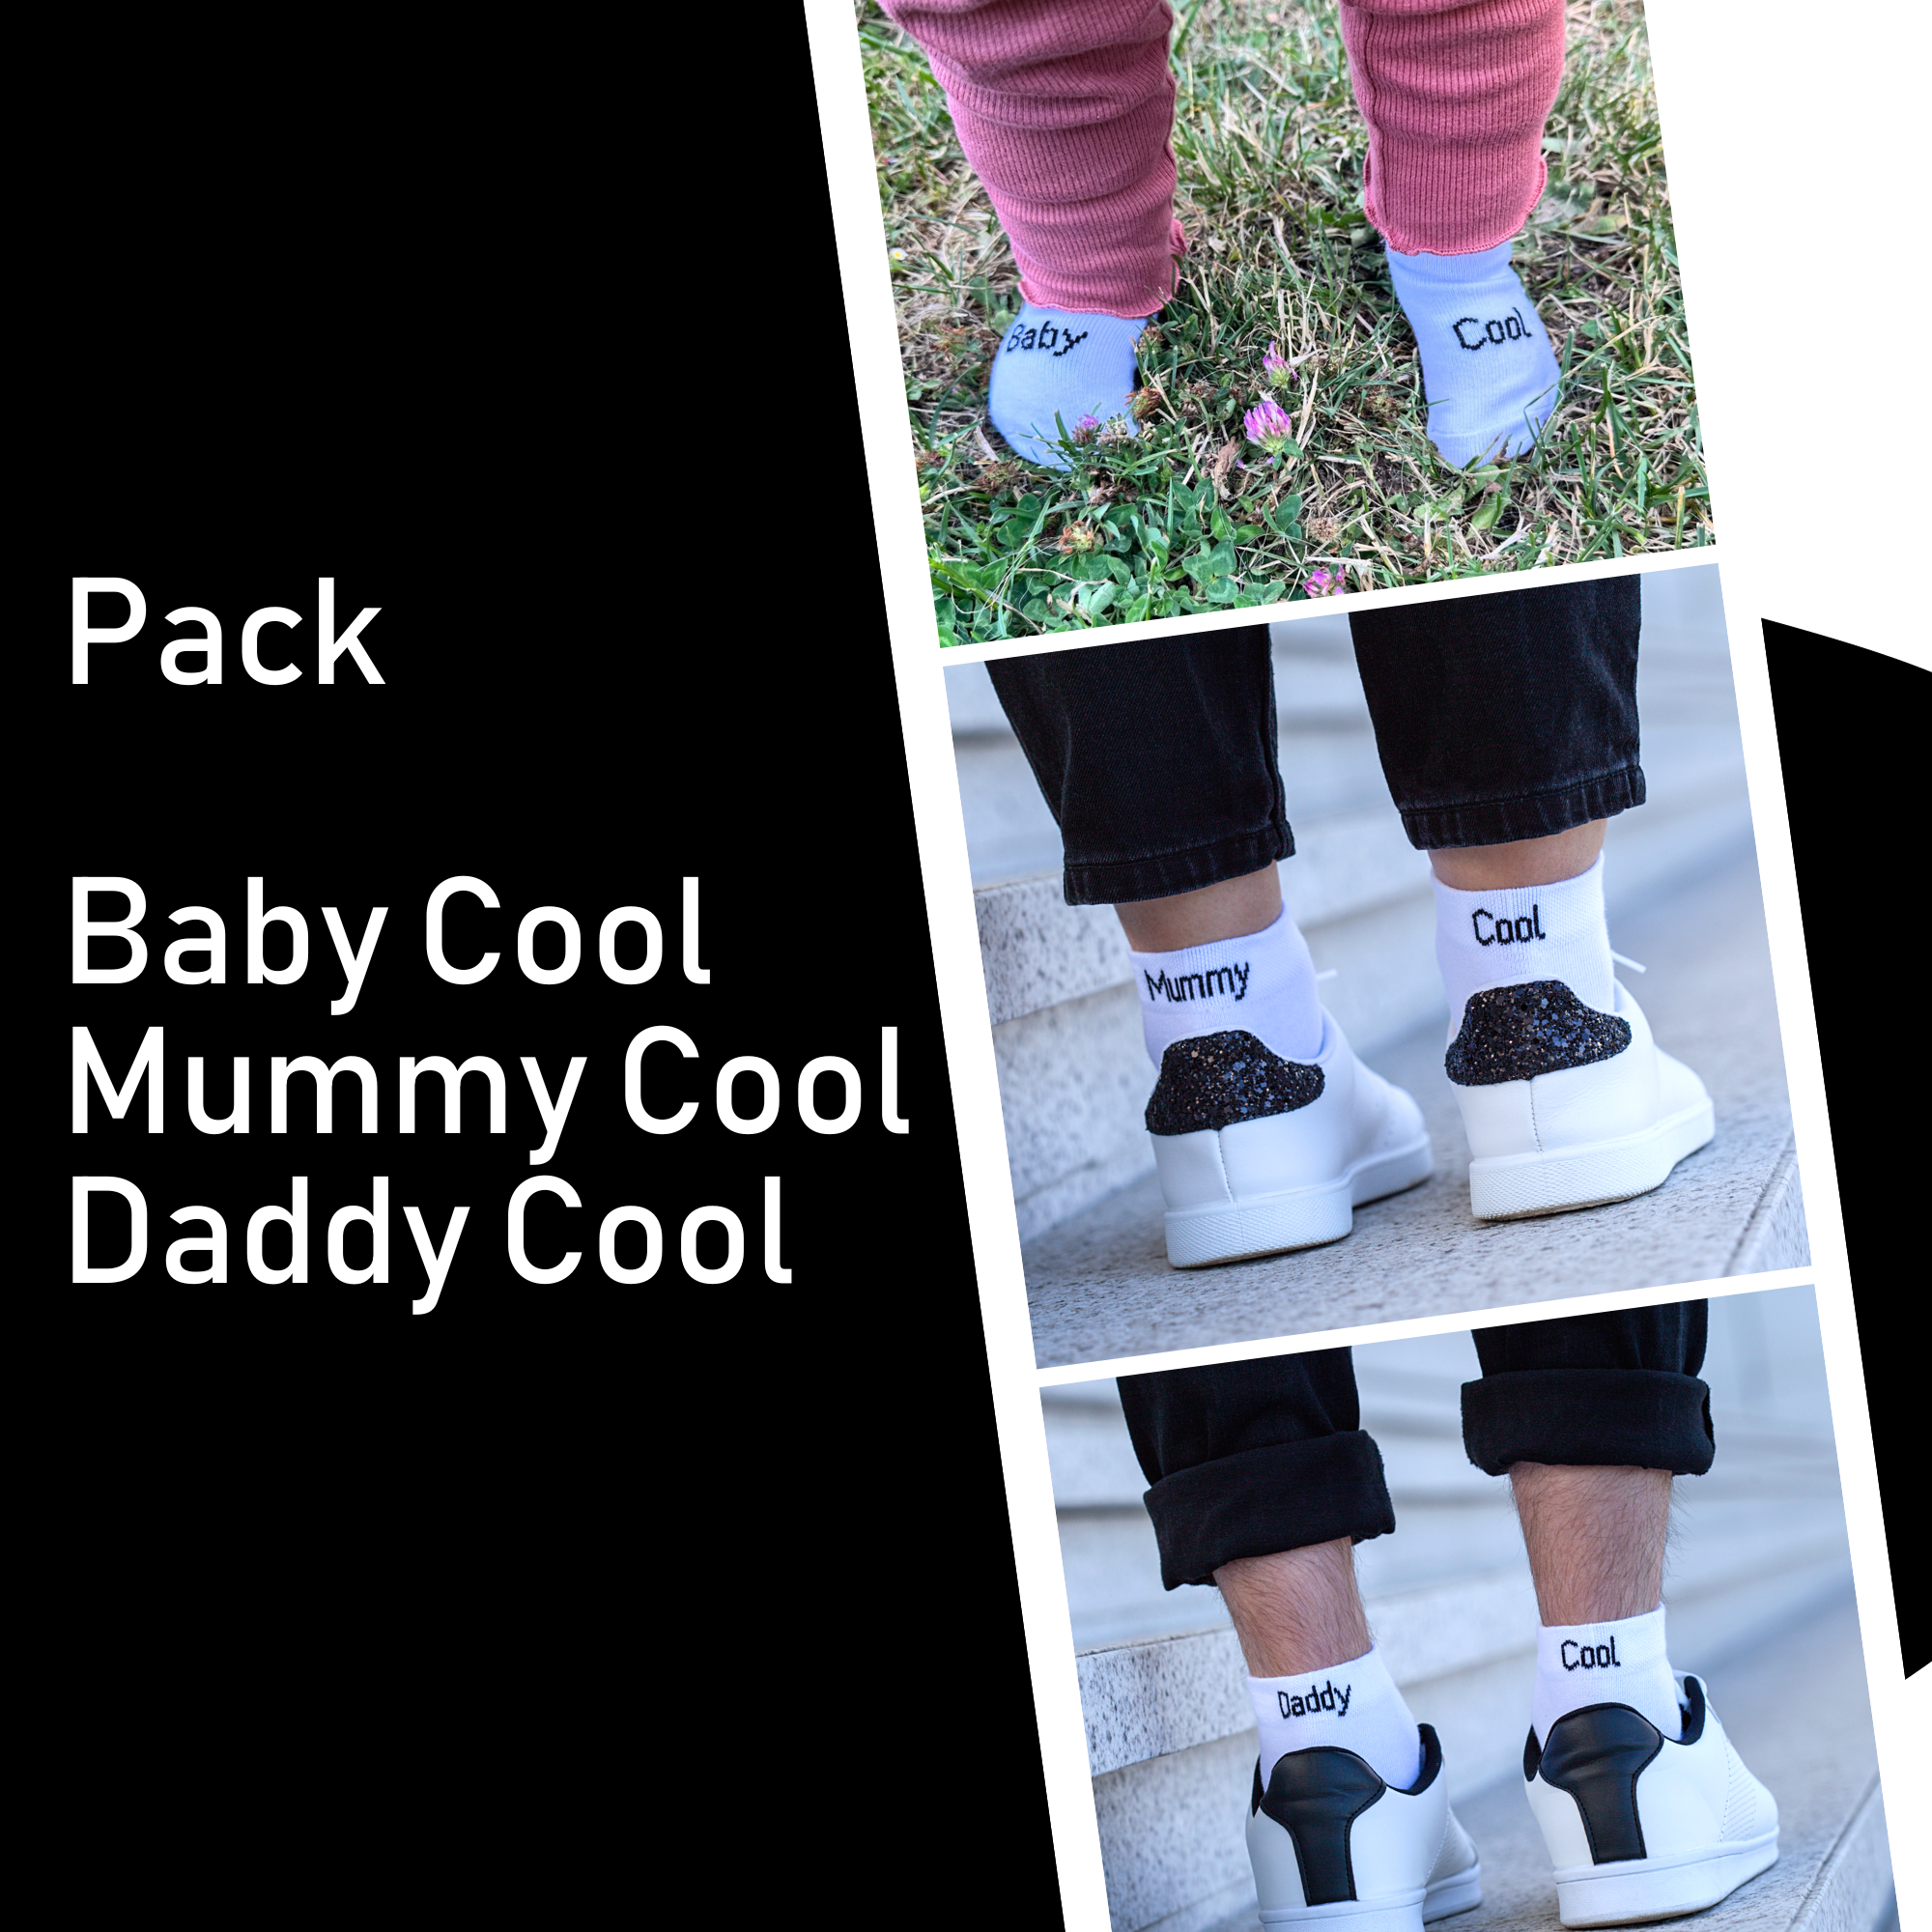 Pack Baby Cool / Mummy Cool / Daddy Cool